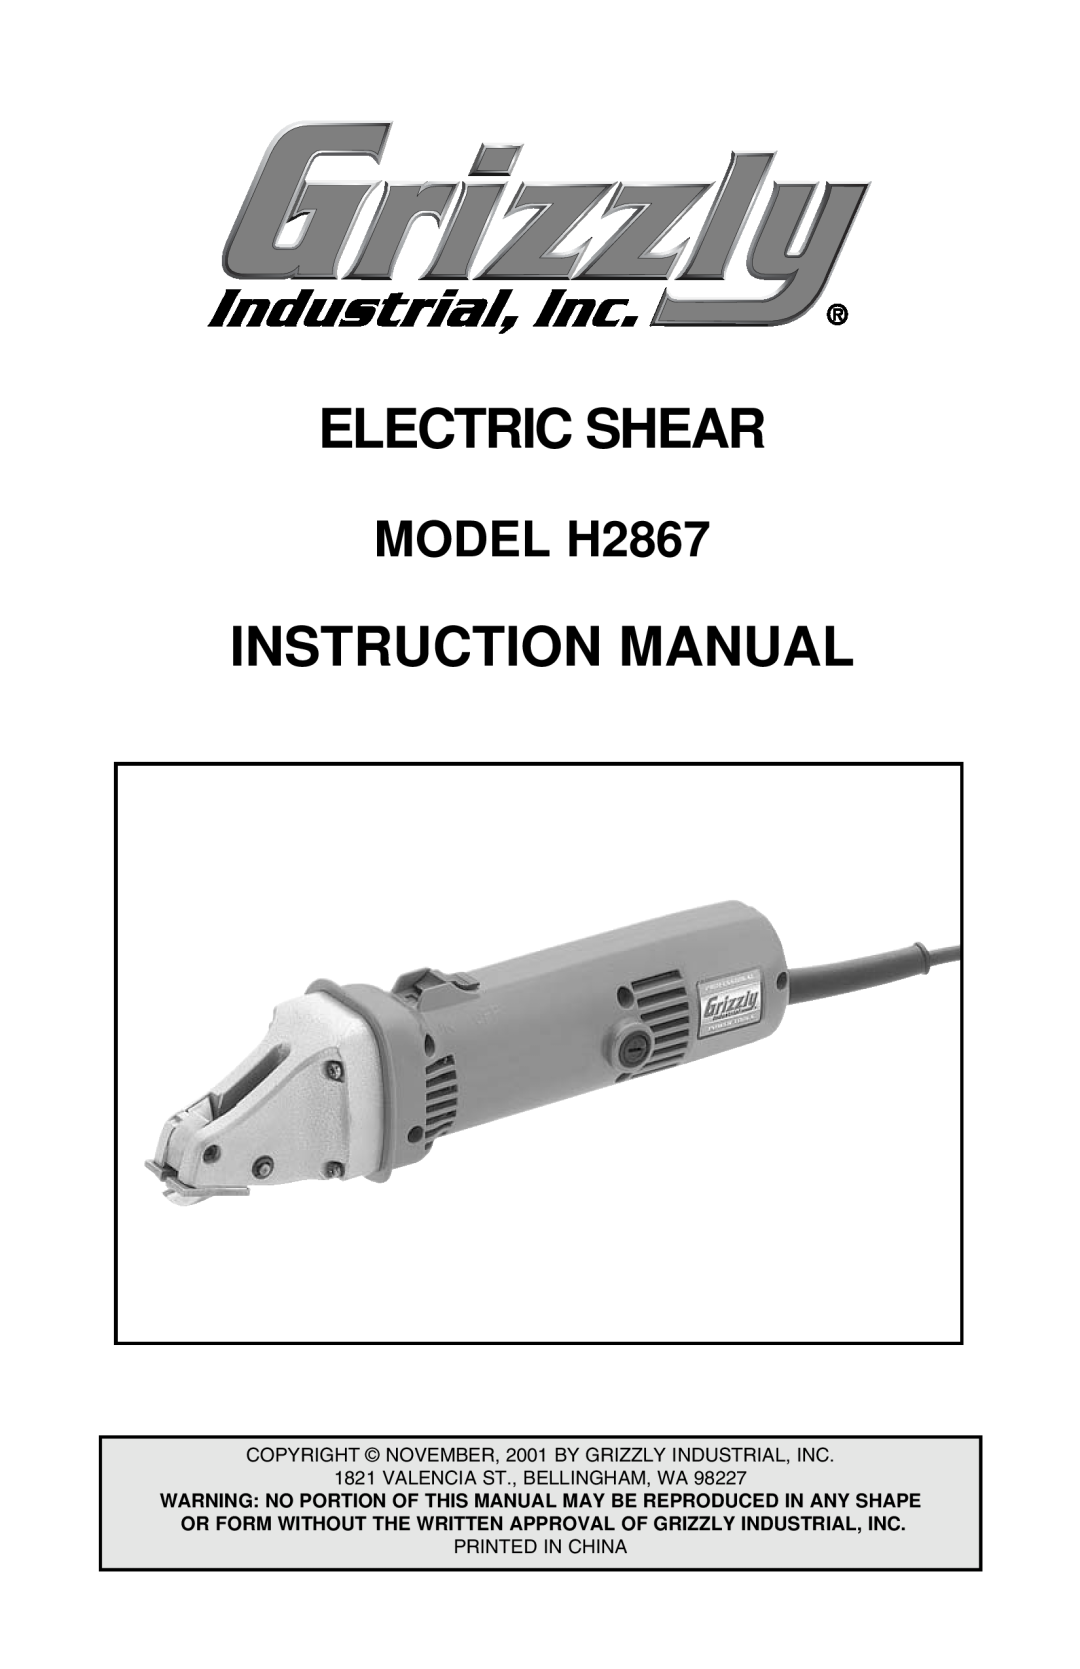 Grizzly instruction manual Electric Shear, MODEL H2867 